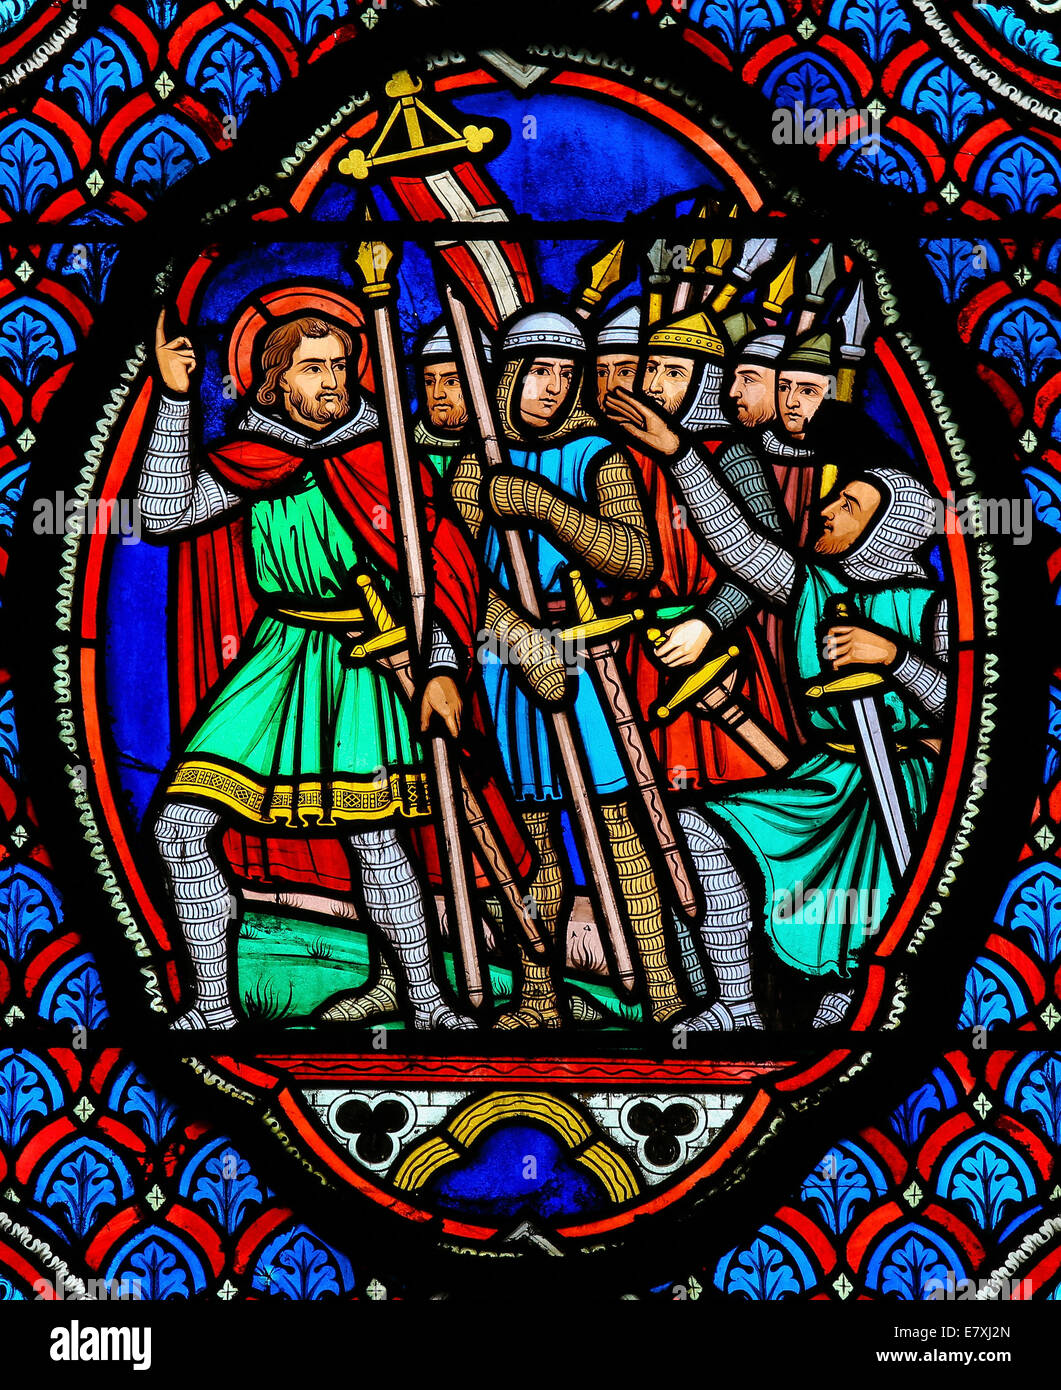 Stained glass window depicting Crusaders in the Cathedral of Tours, France. Stock Photo